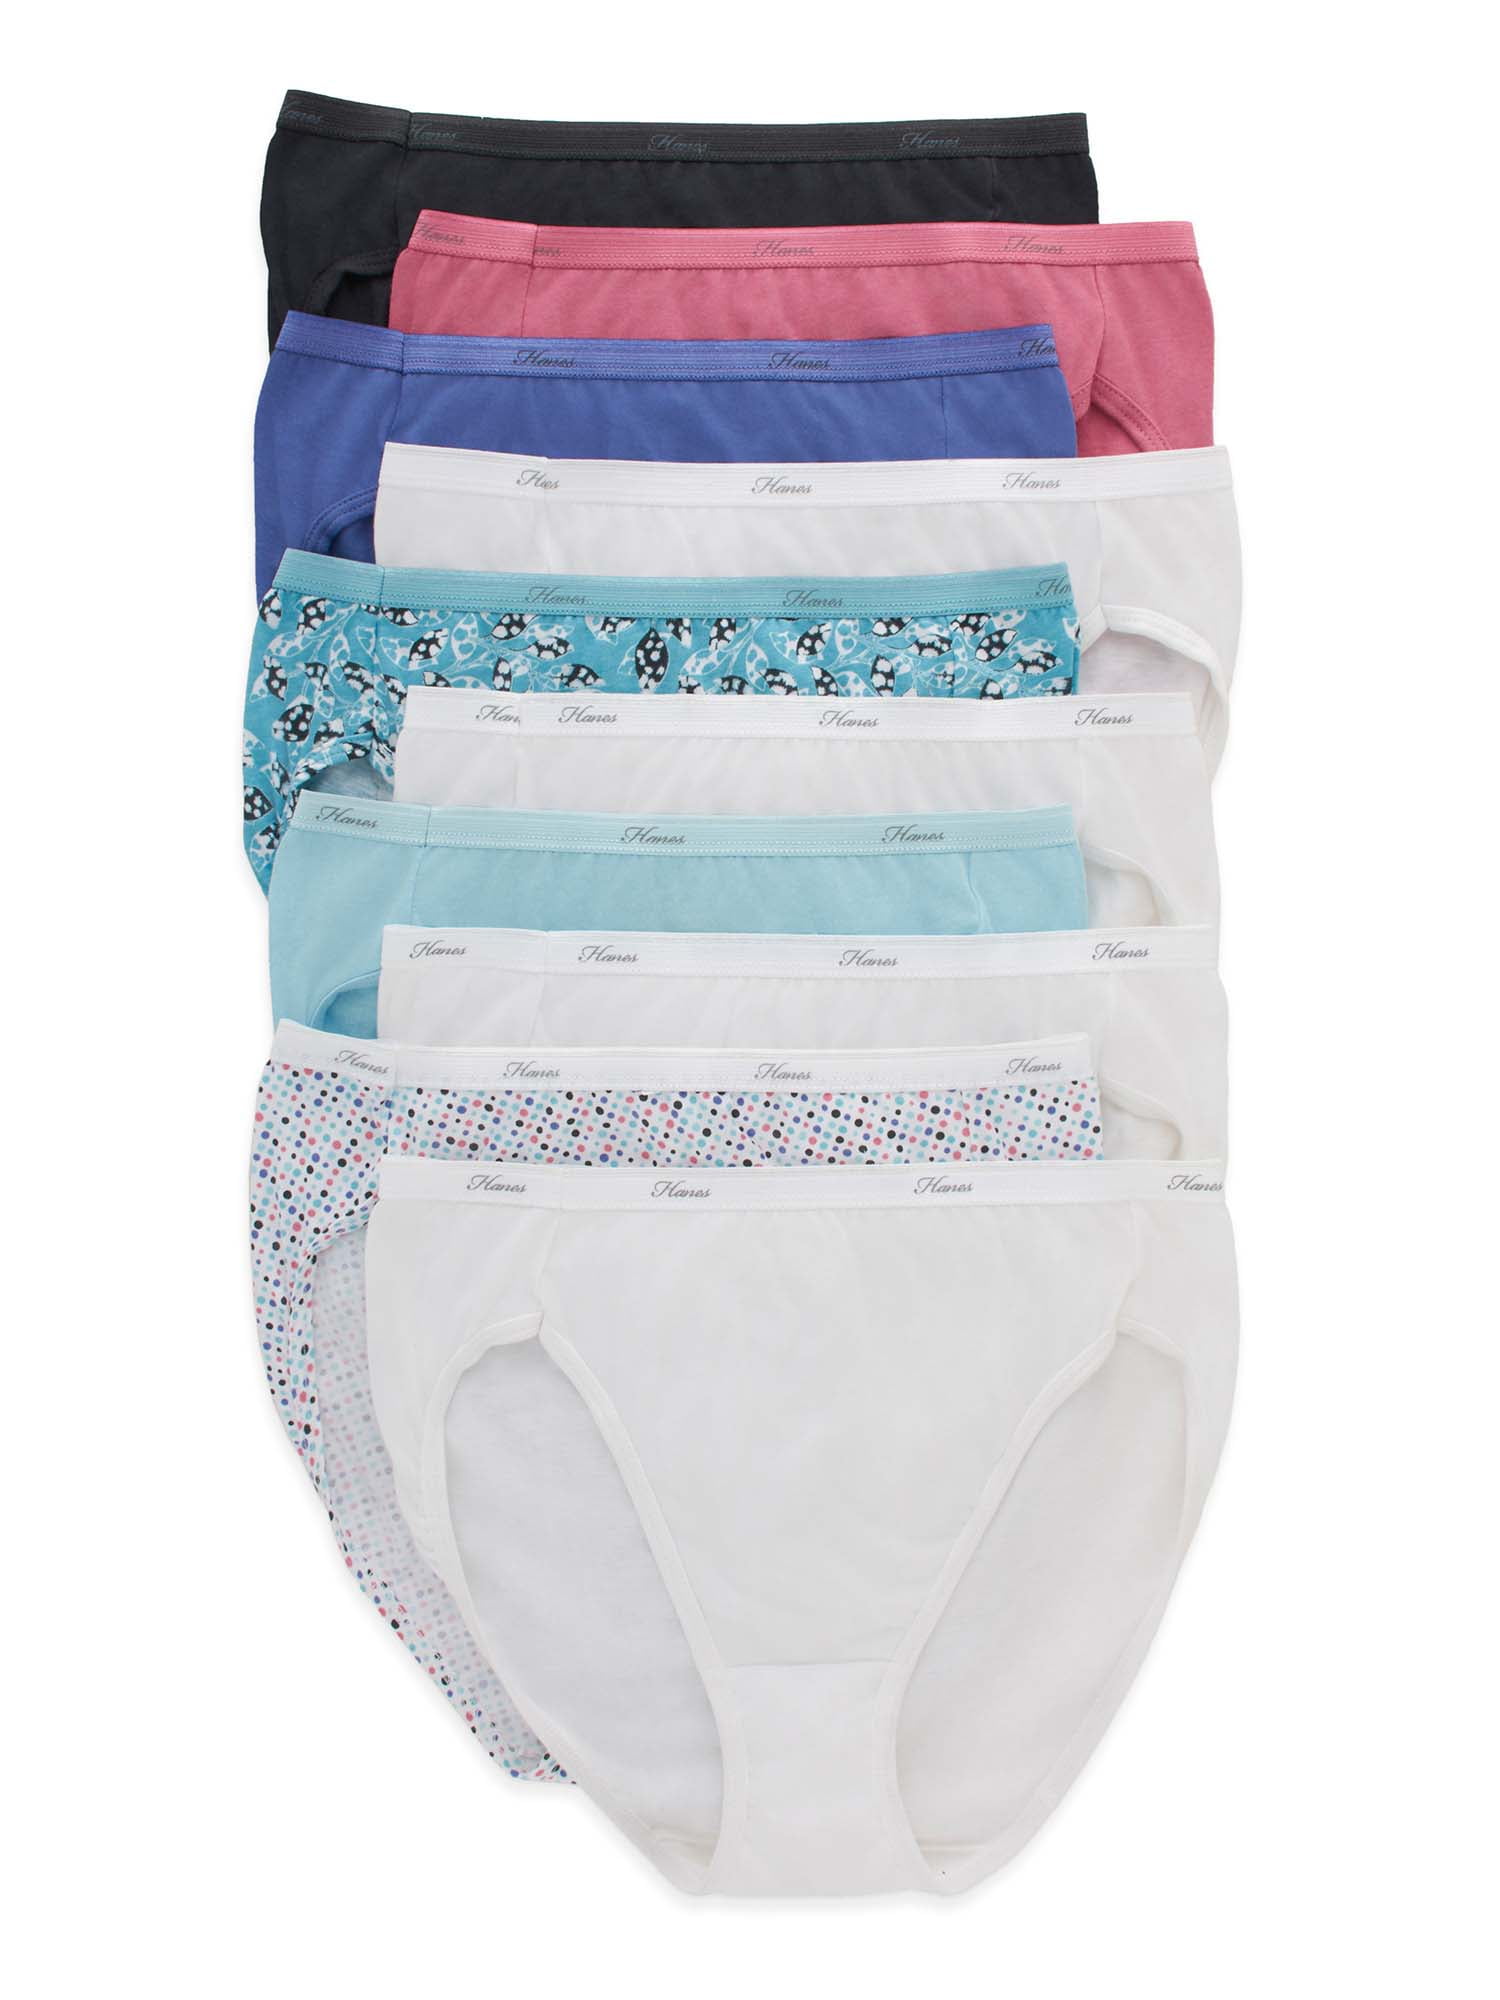 Hanes Women's Assorted Cotton Briefs Knickers (3 Pack), 8